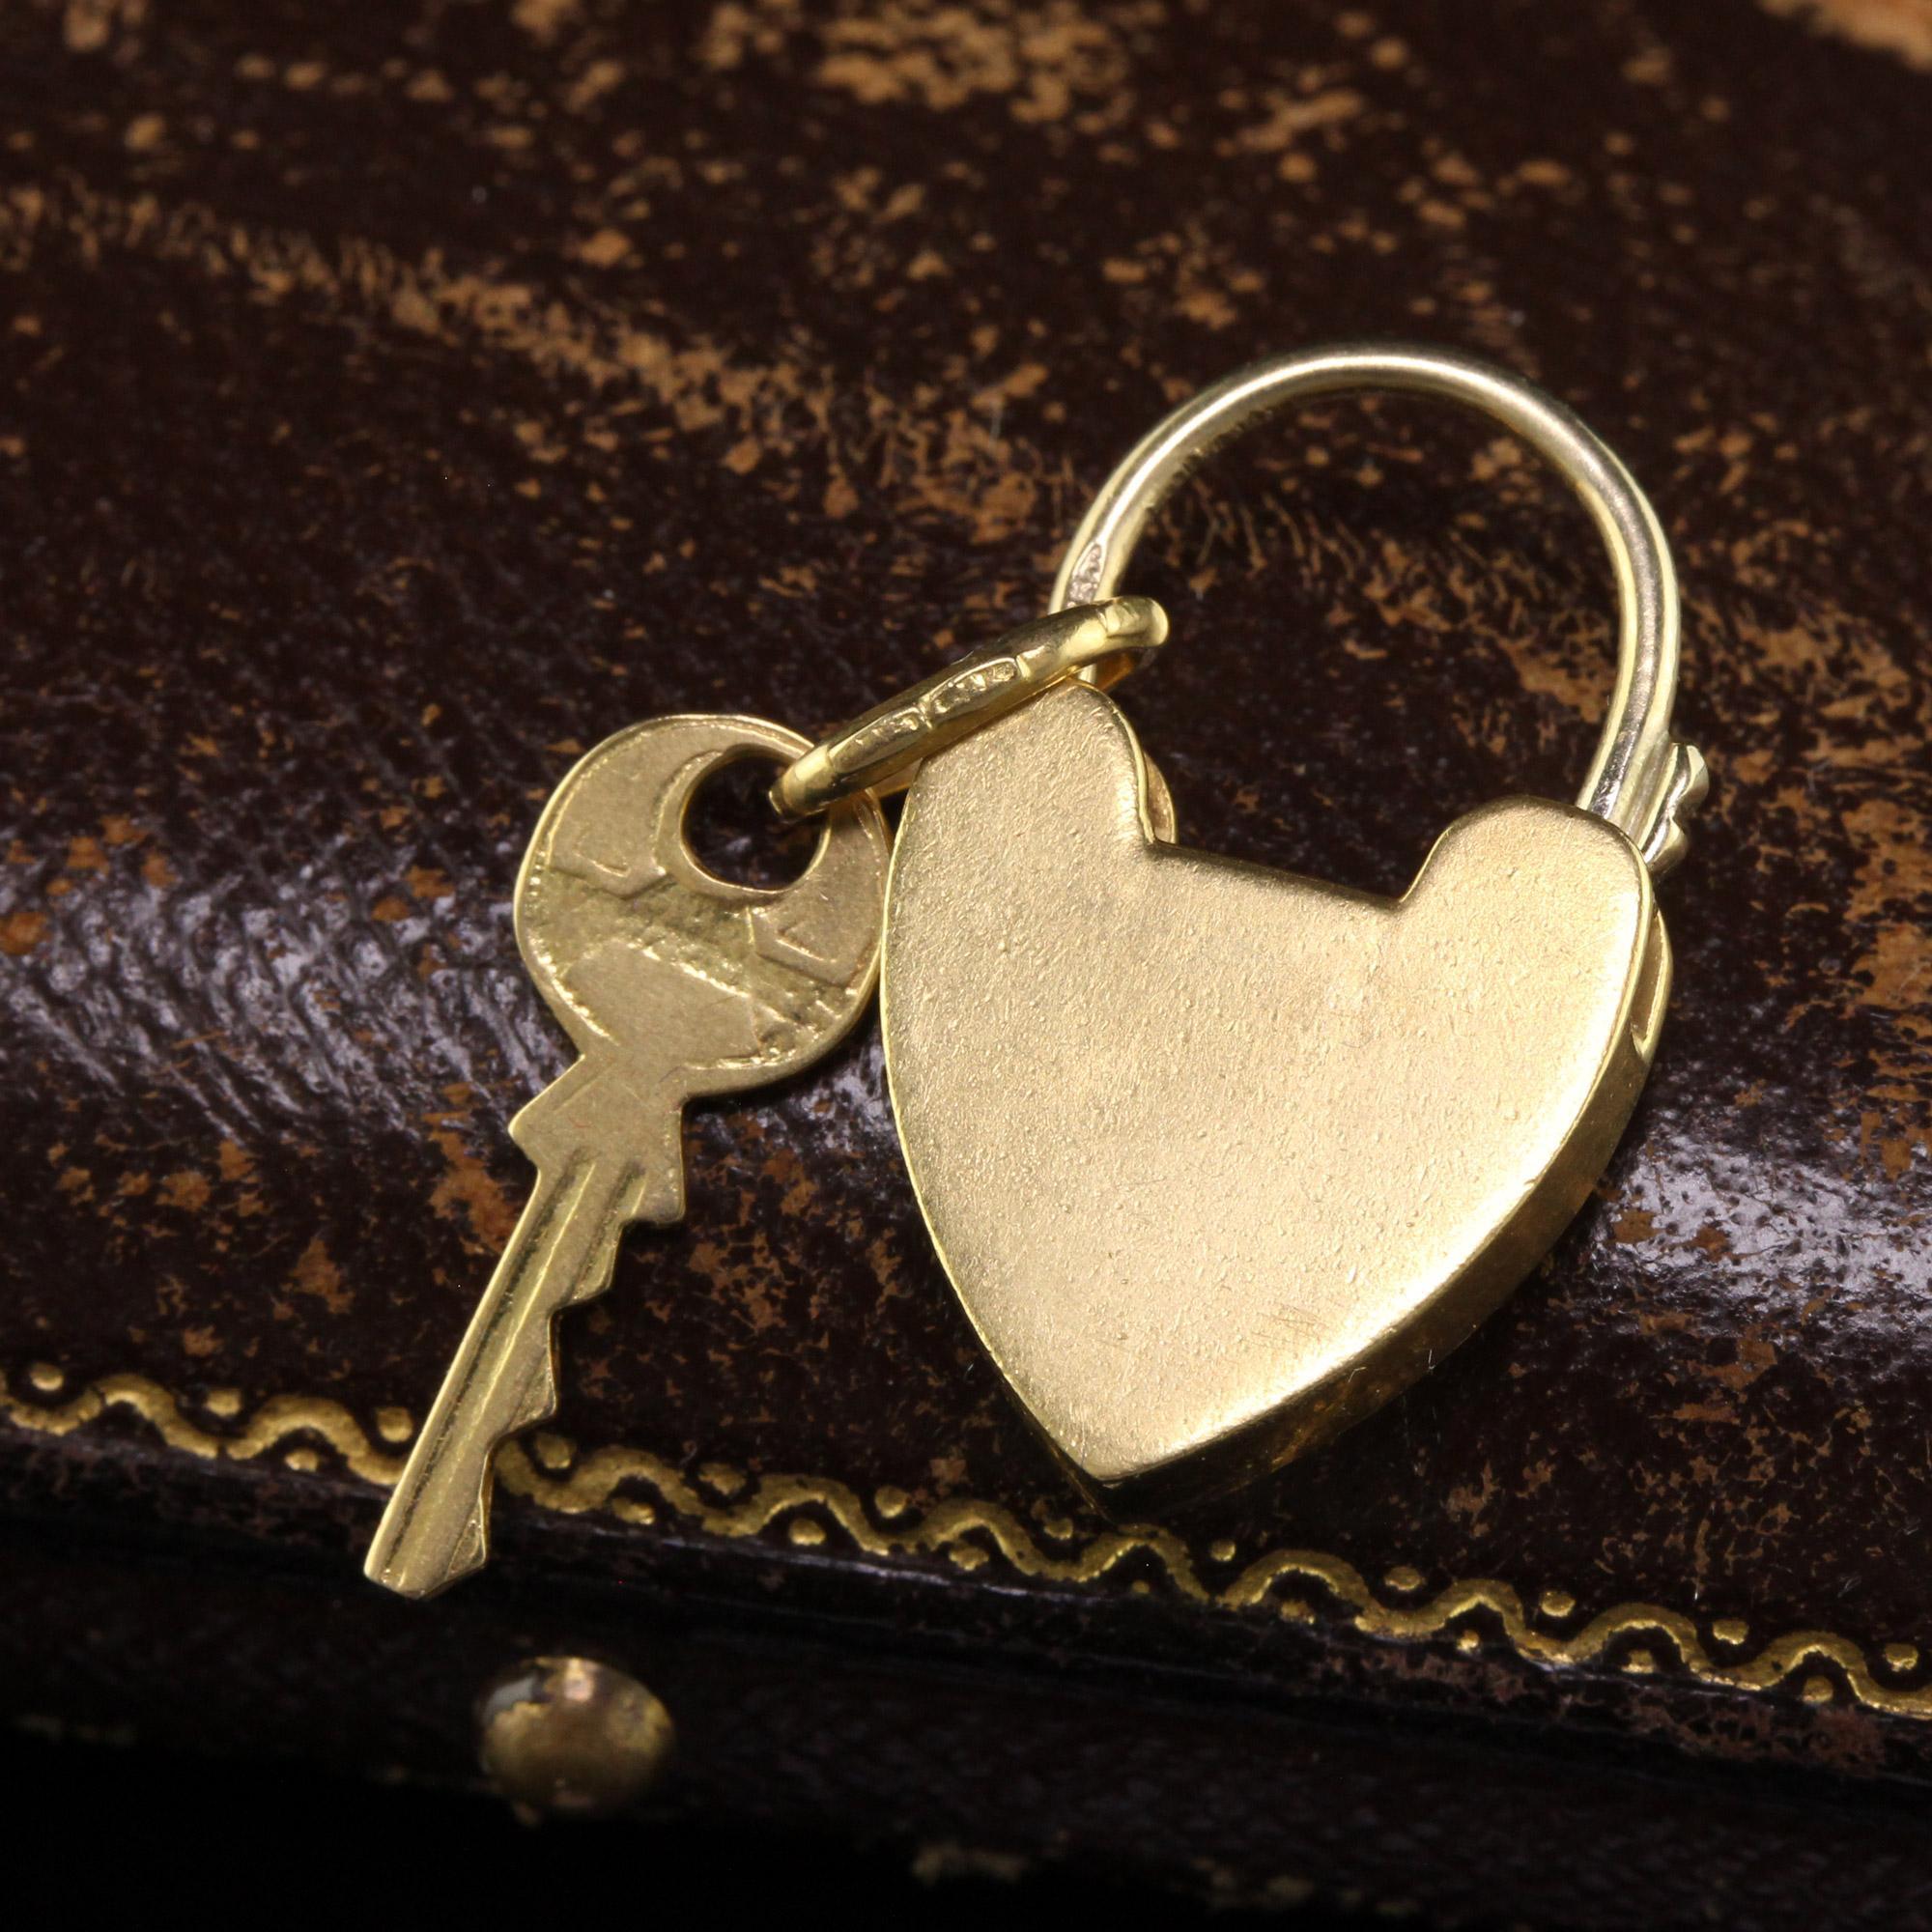 Beautiful Antique Victorian 18K Yellow Gold Heart Lock and Key Pendant Charm. This amazing antique Victorian heart pendant charm is crafted in 18k yellow gold. The charm has a locking mechanism that works and a key that is connected to it but is not